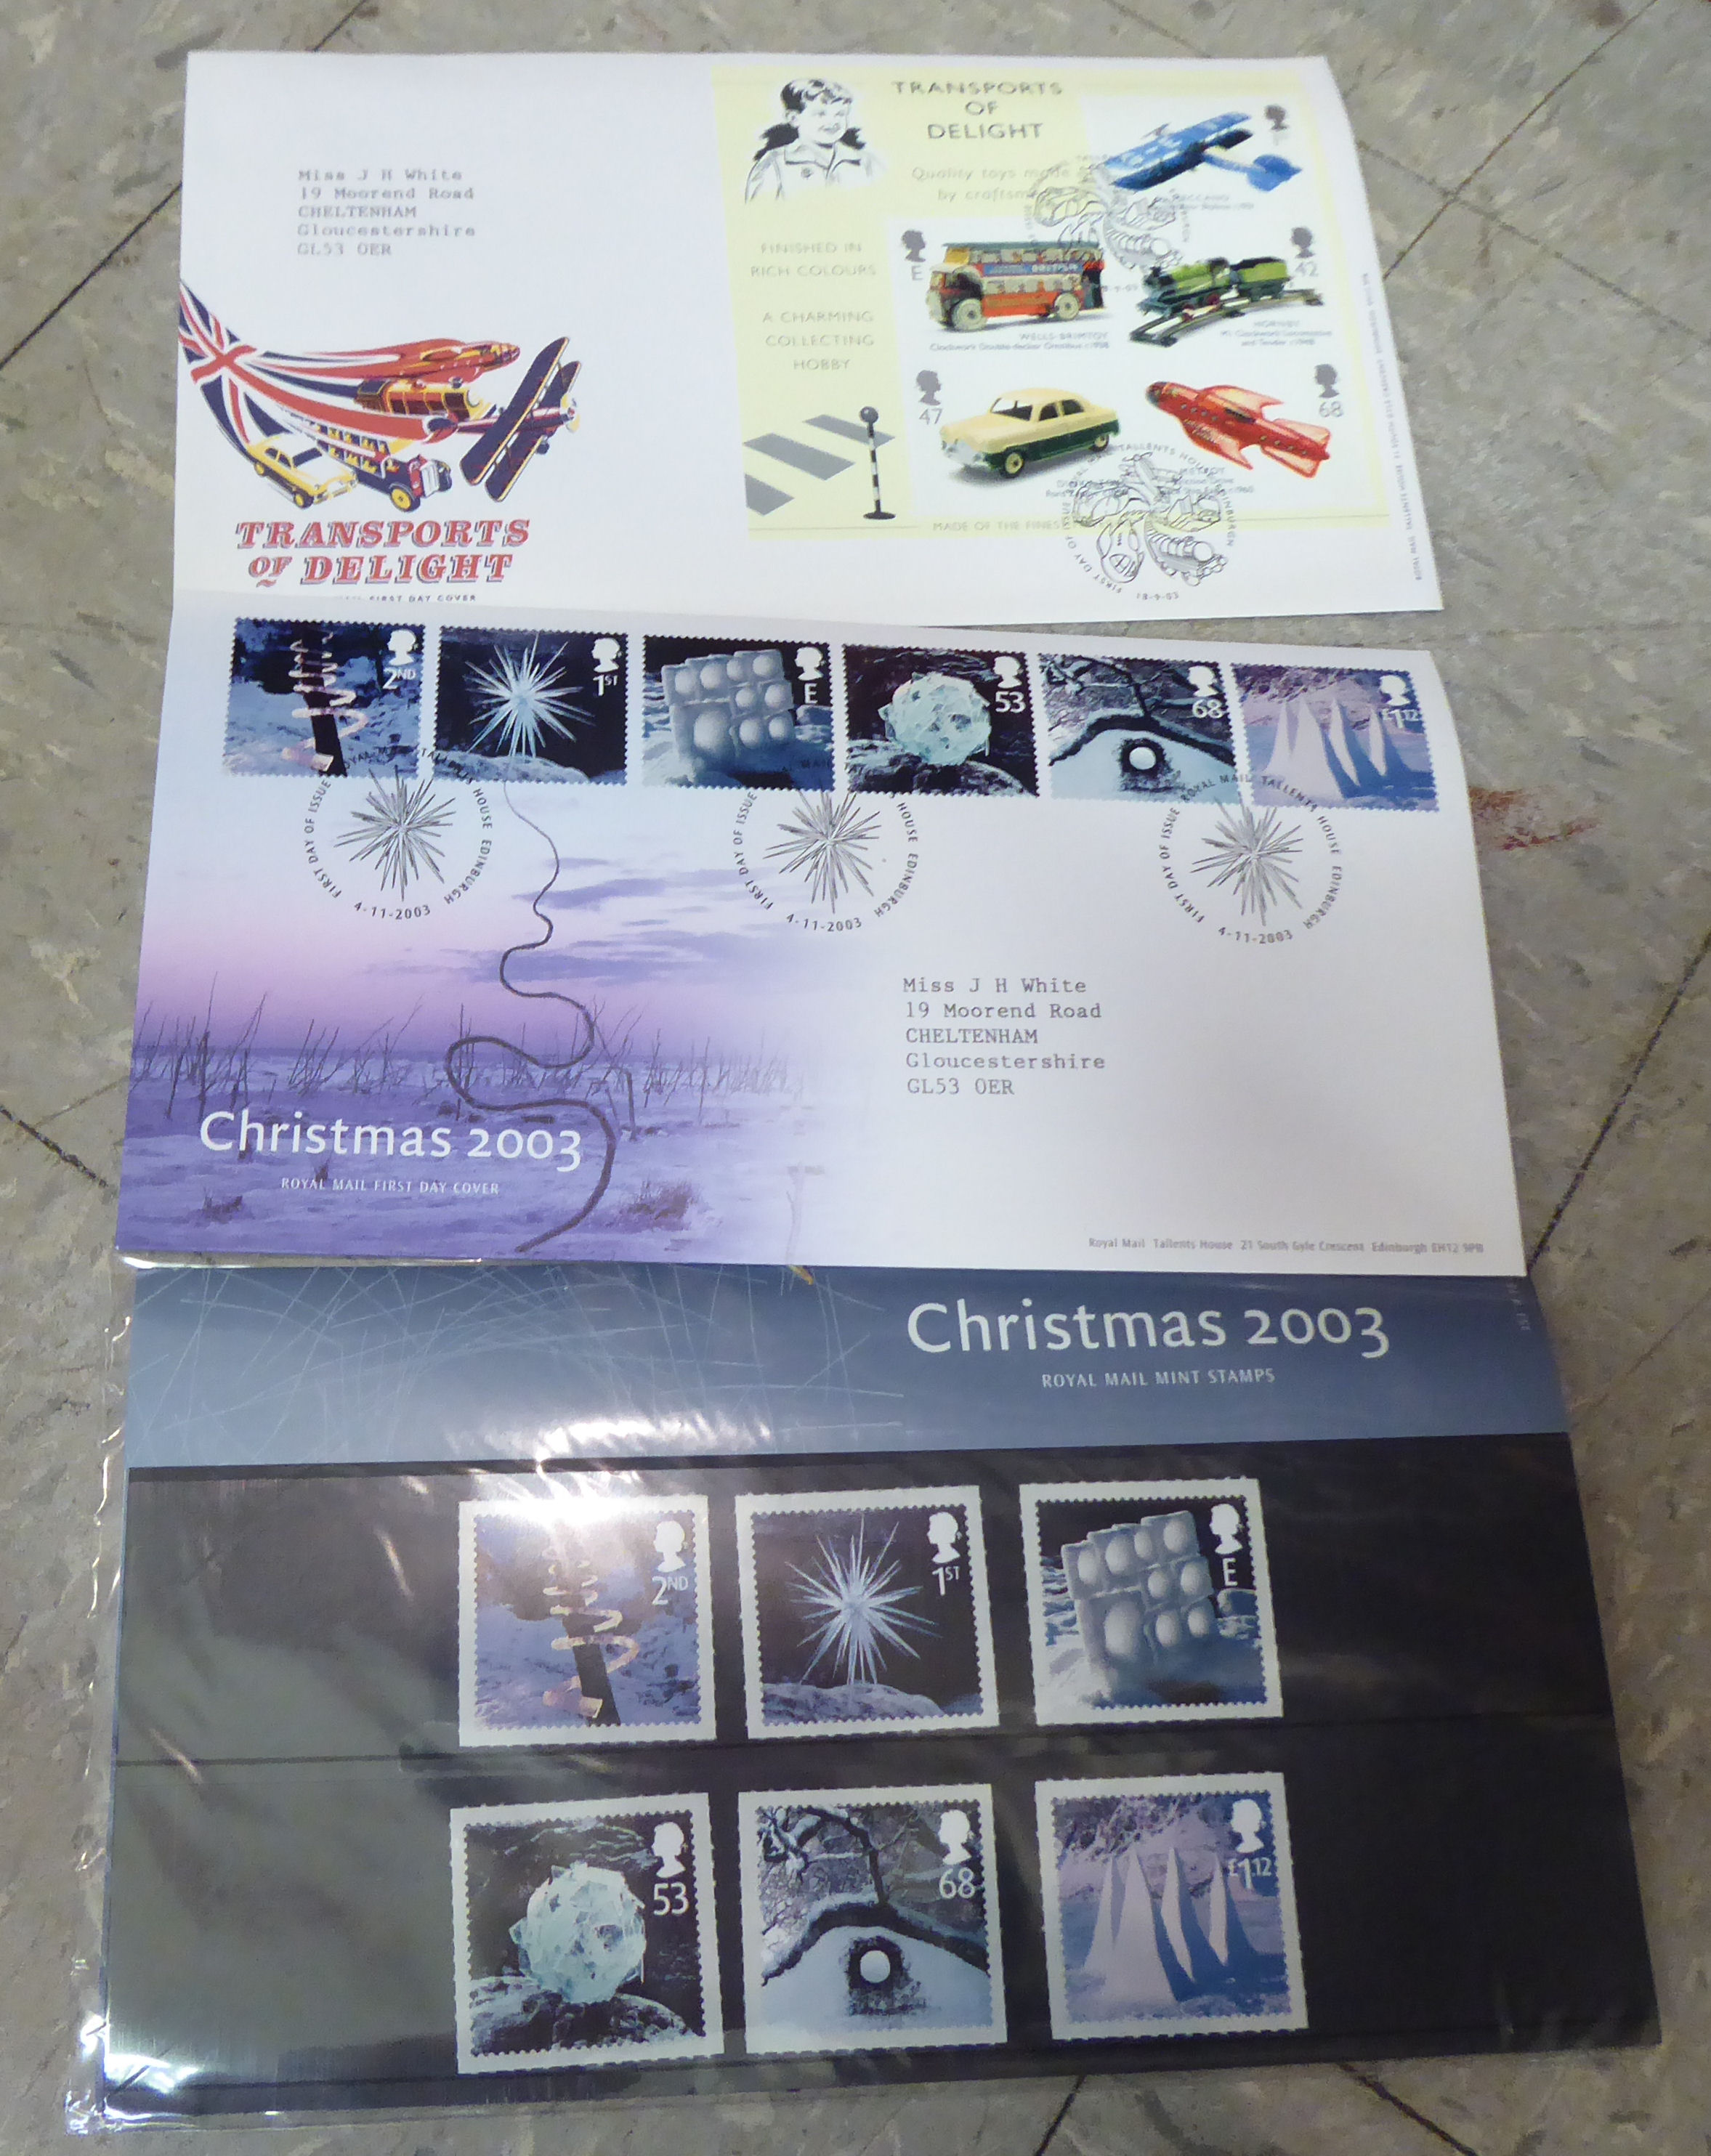 Uncollated postage stamps: to include presentation packs - Image 6 of 6